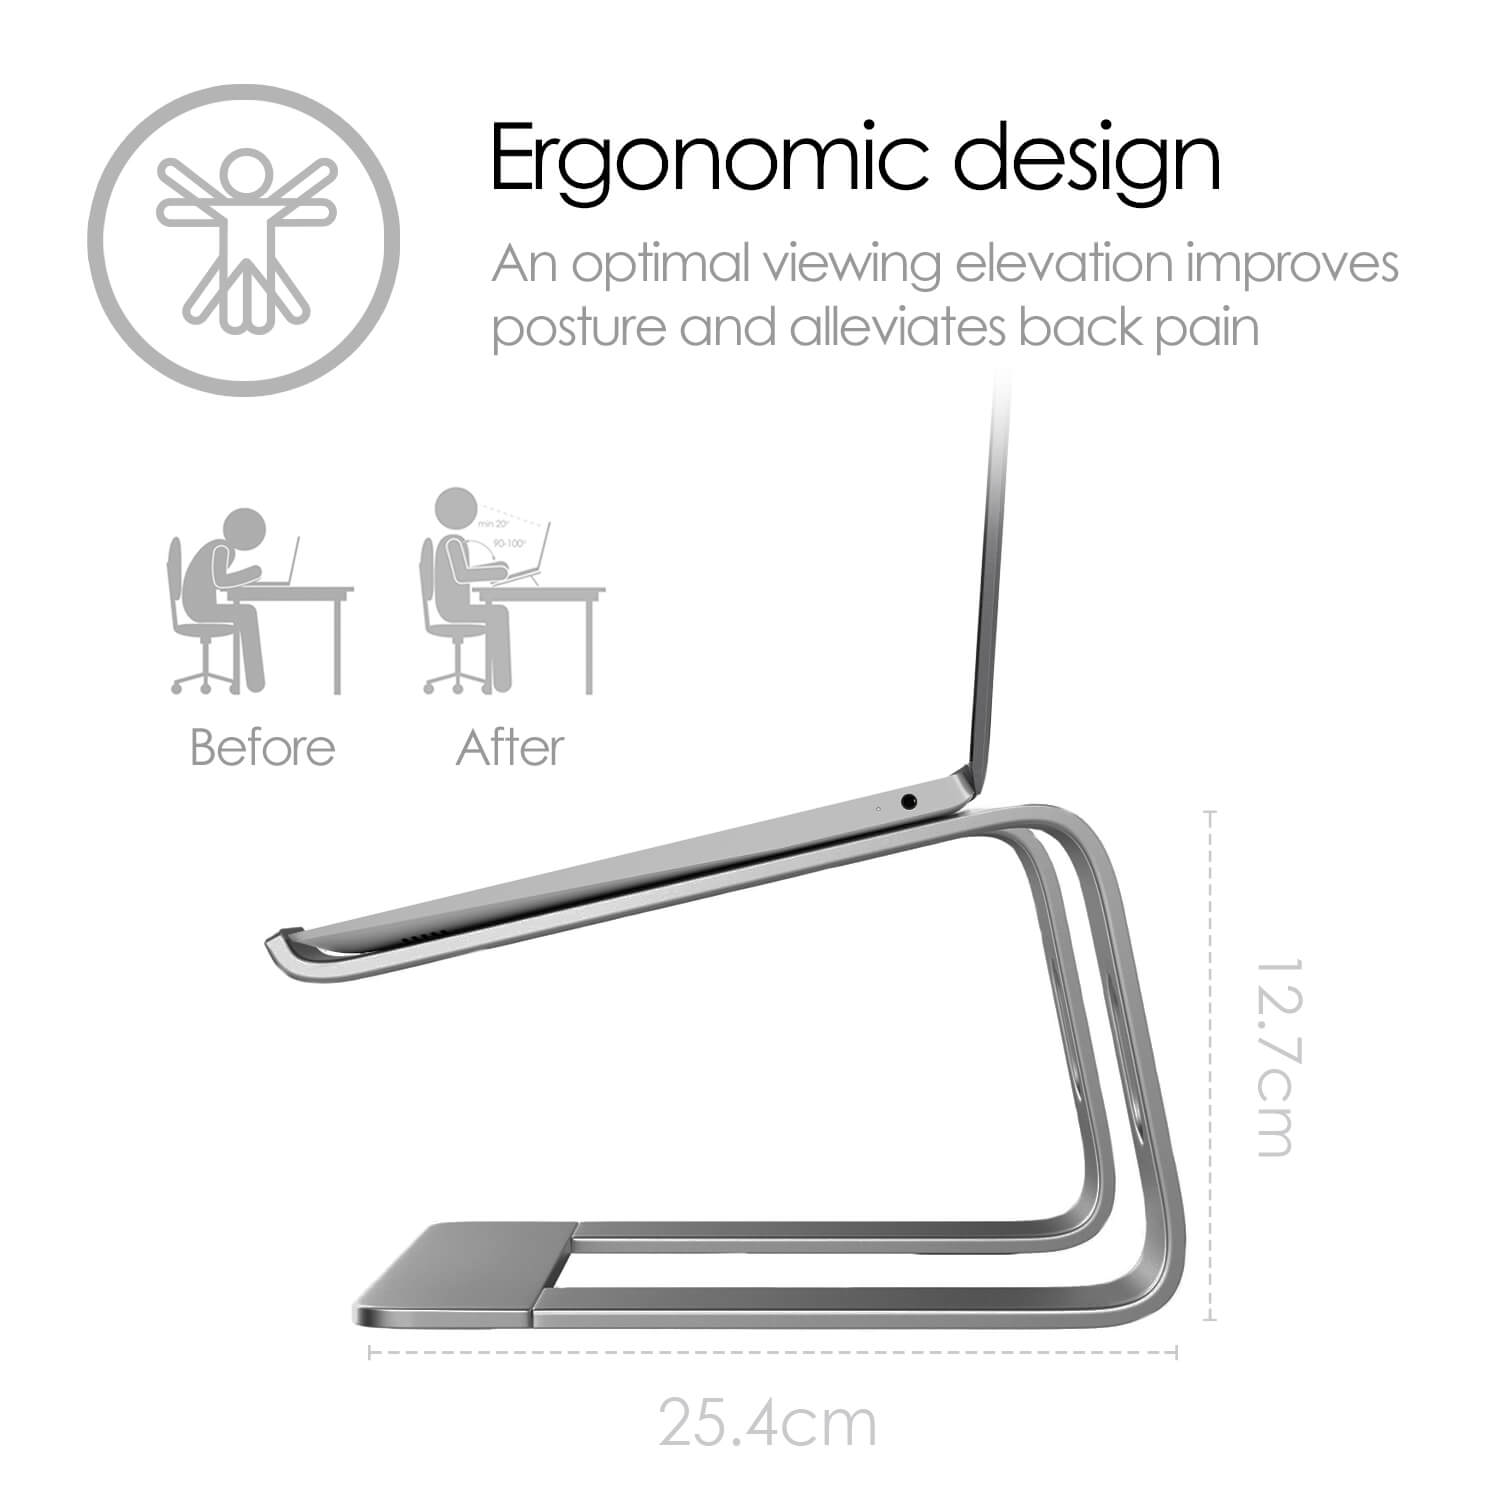 A side view of a well engineered aluminium laptop stand showing the 12.7 cm of elevation that the stand provides. 2 comparison illustrations show firstly a person without the stand hunched over a laptop with poor spine posture and secondly a person using a laptop on the stand with a good spine posture. Text reads: "An optimal viewing elevation improves posture and alleviates back pain".